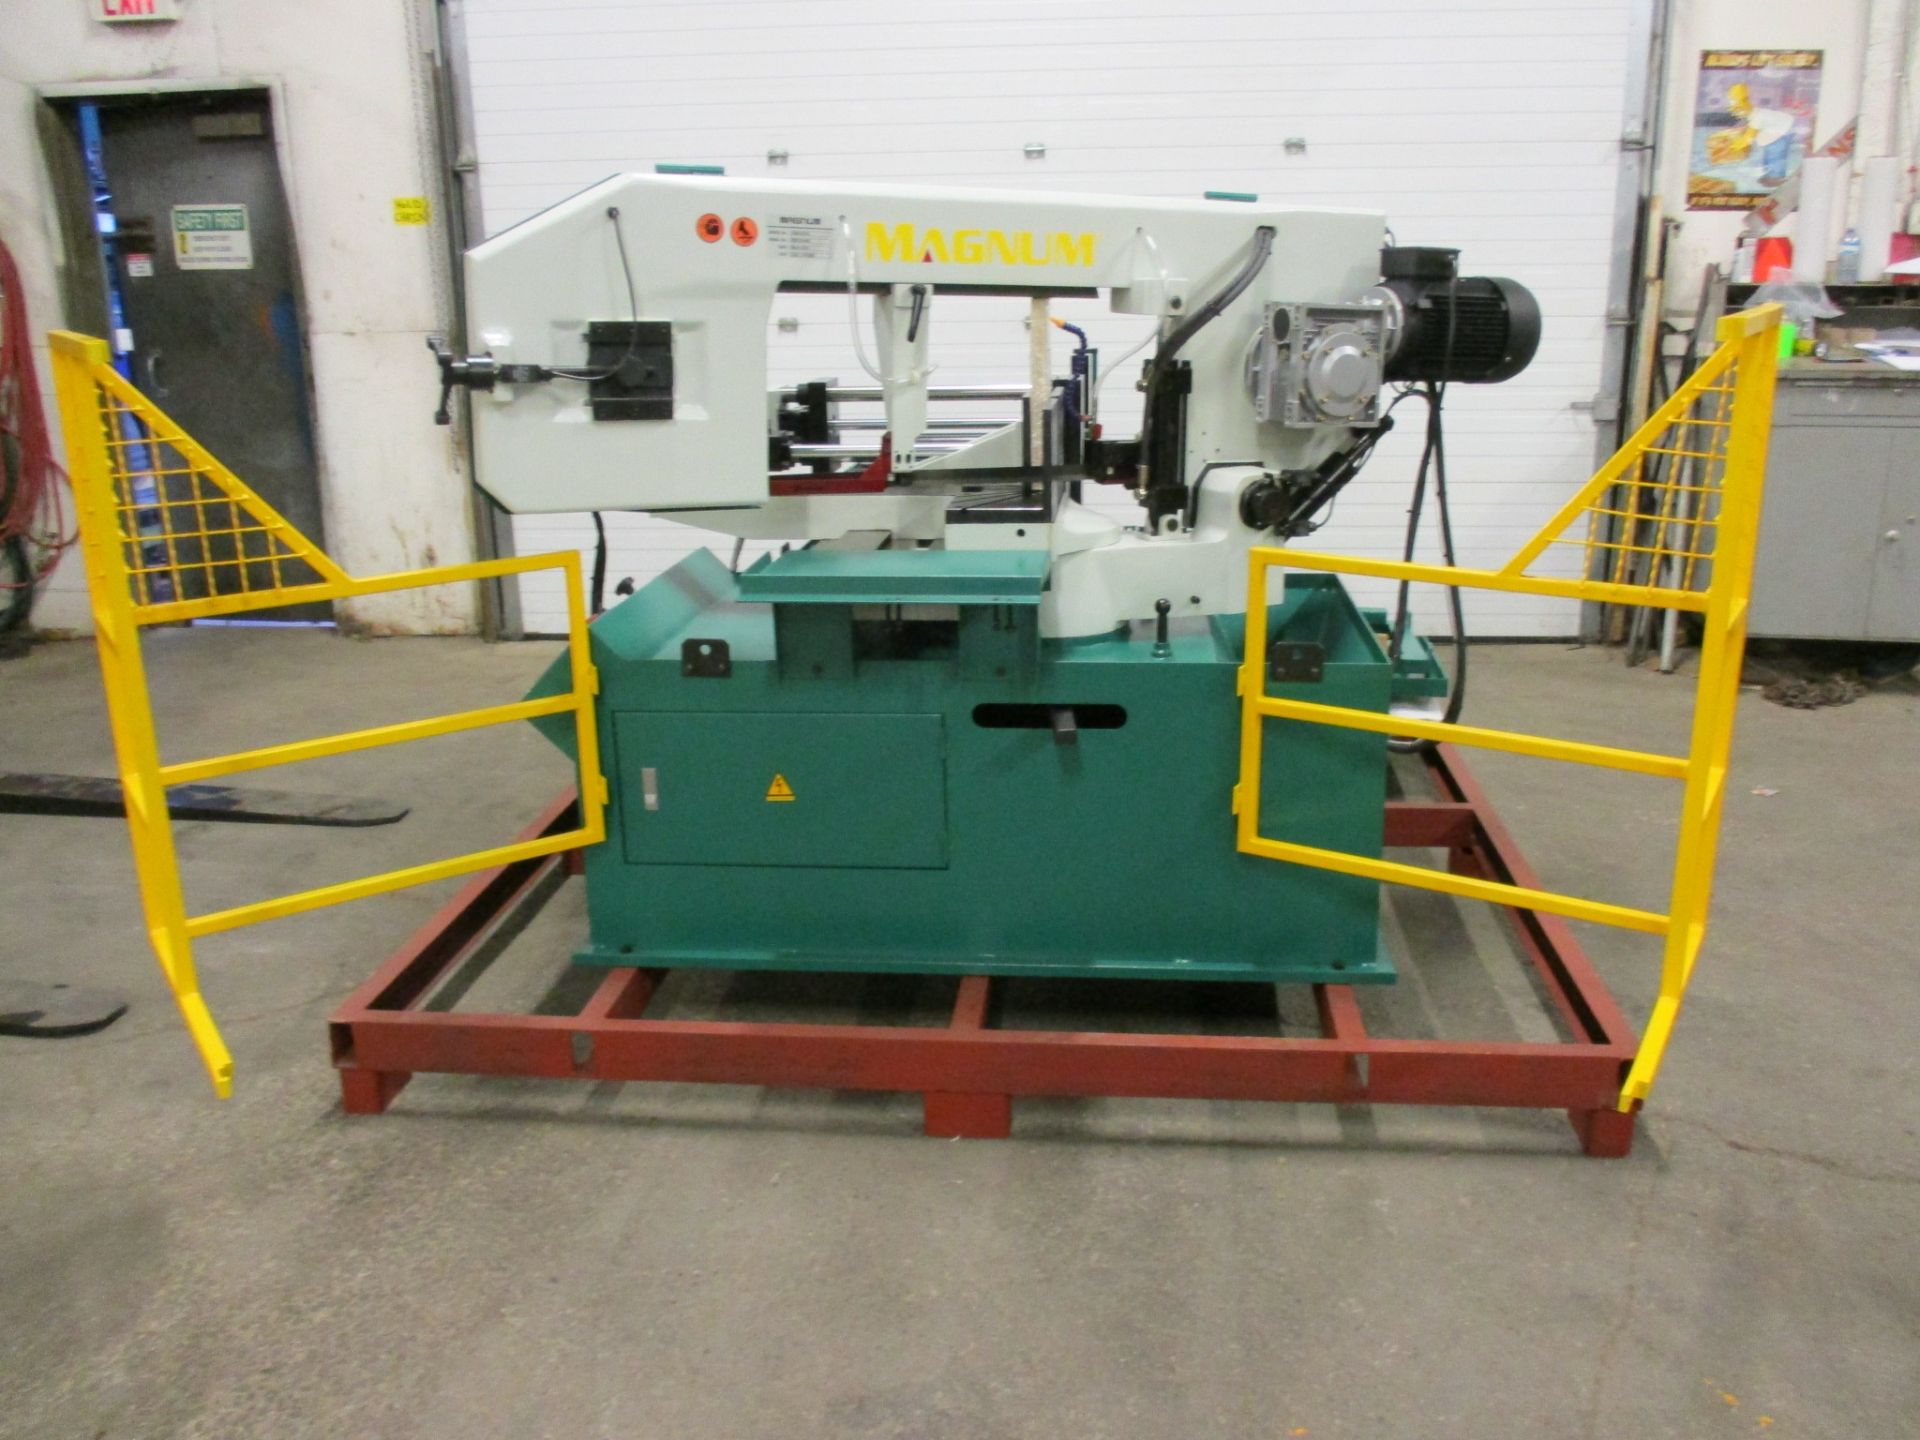 Magnum BSM-1813A Fully Automatic CNC Horizontal Band Saw - 18 X 13 inch CUTTING CAPACITY - CNC - Image 3 of 4